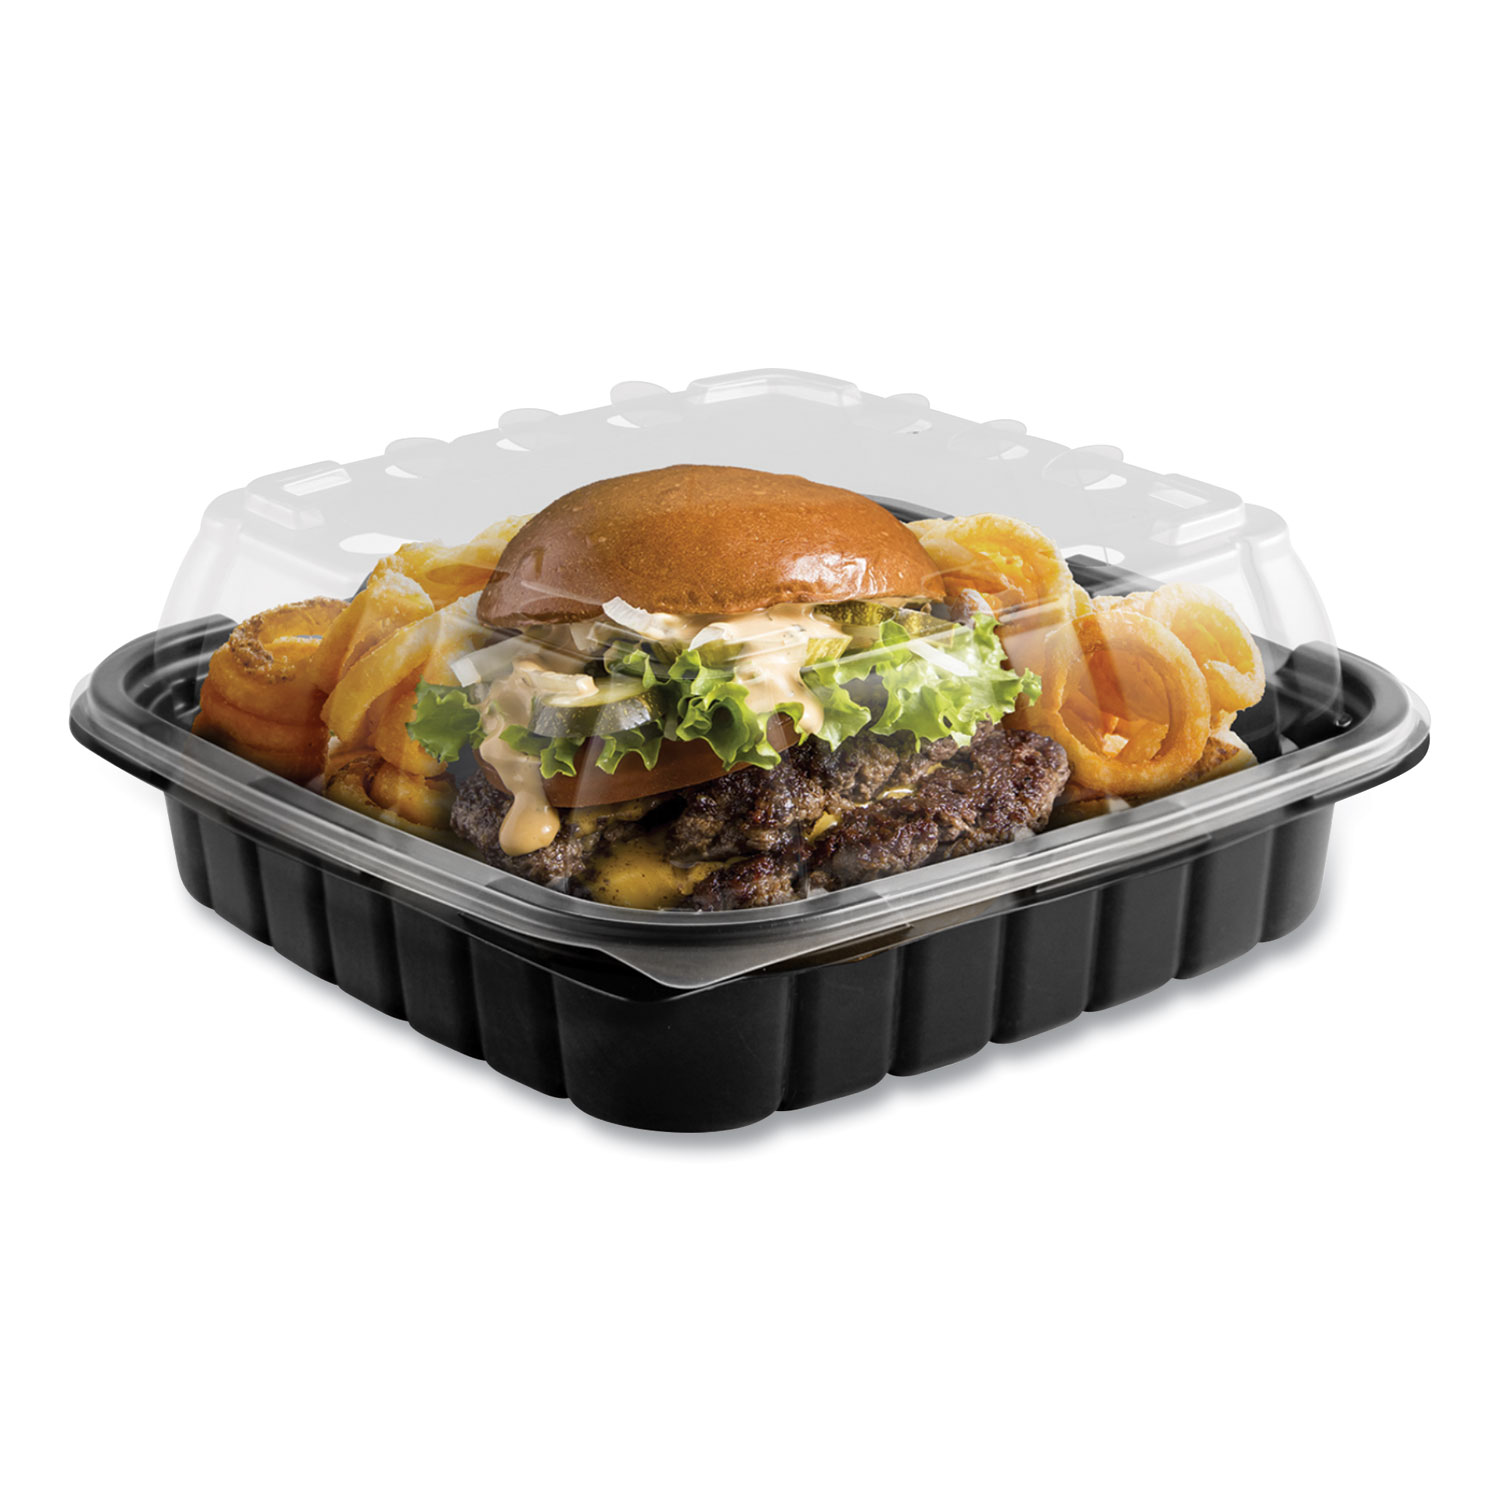  Anchor Packaging 4118501 Crisp Foods Technologies Containers, 33 oz, 8.46 x 8.46 x 3.16, 1 Compartment, Clear/Black, 180/Carton (ANZ4118501) 